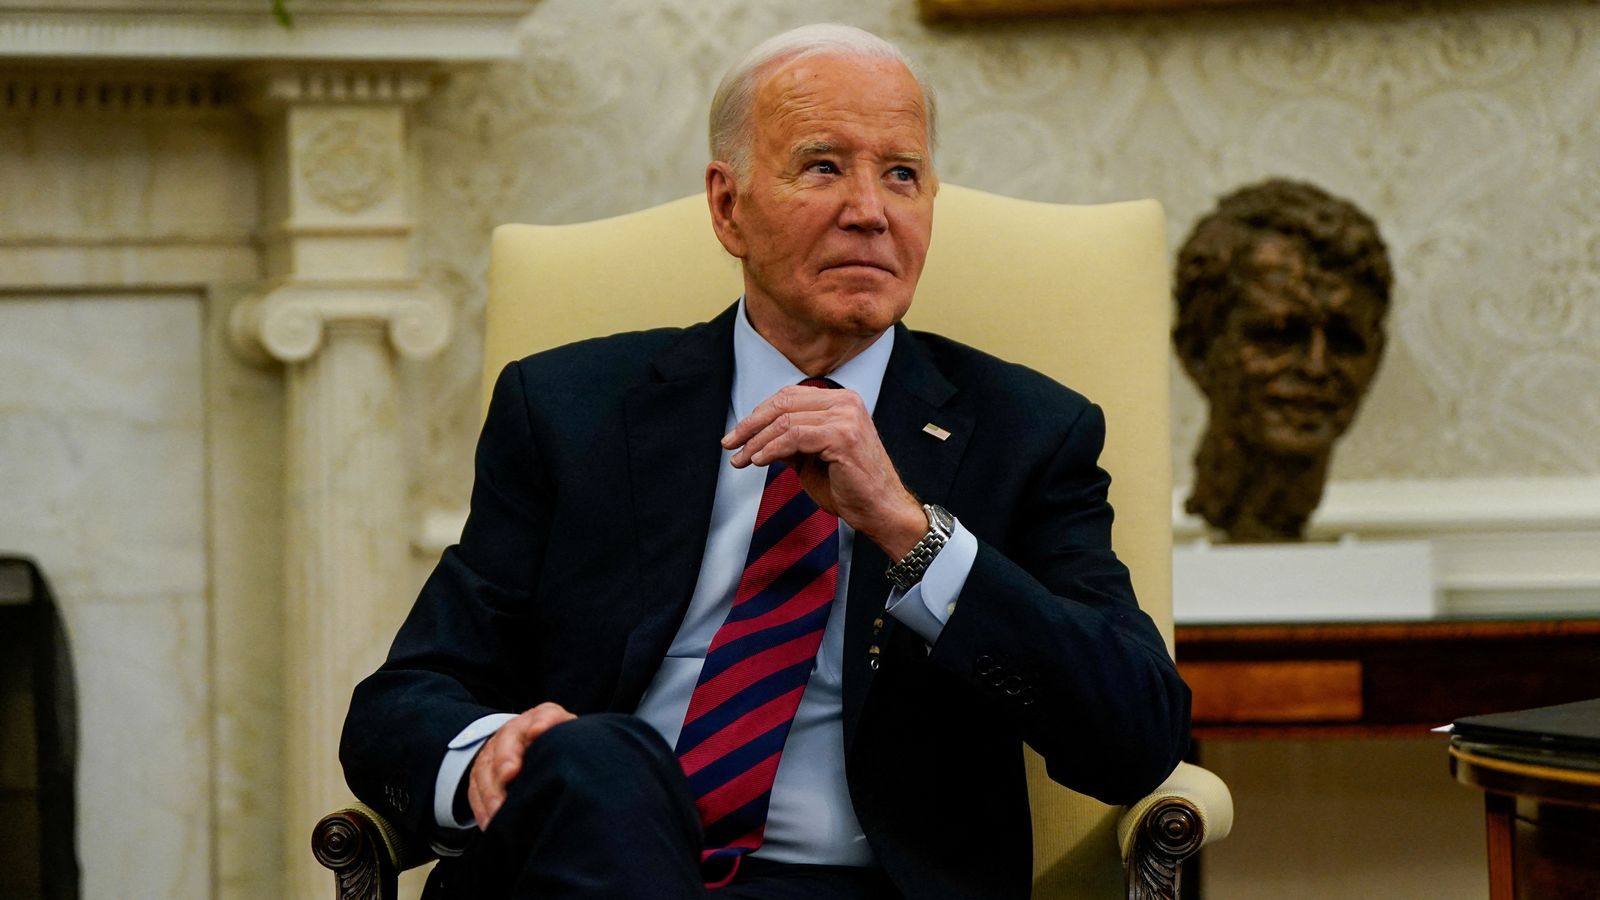 Biden announces new policy shielding immigrants married to US citizens from deportation